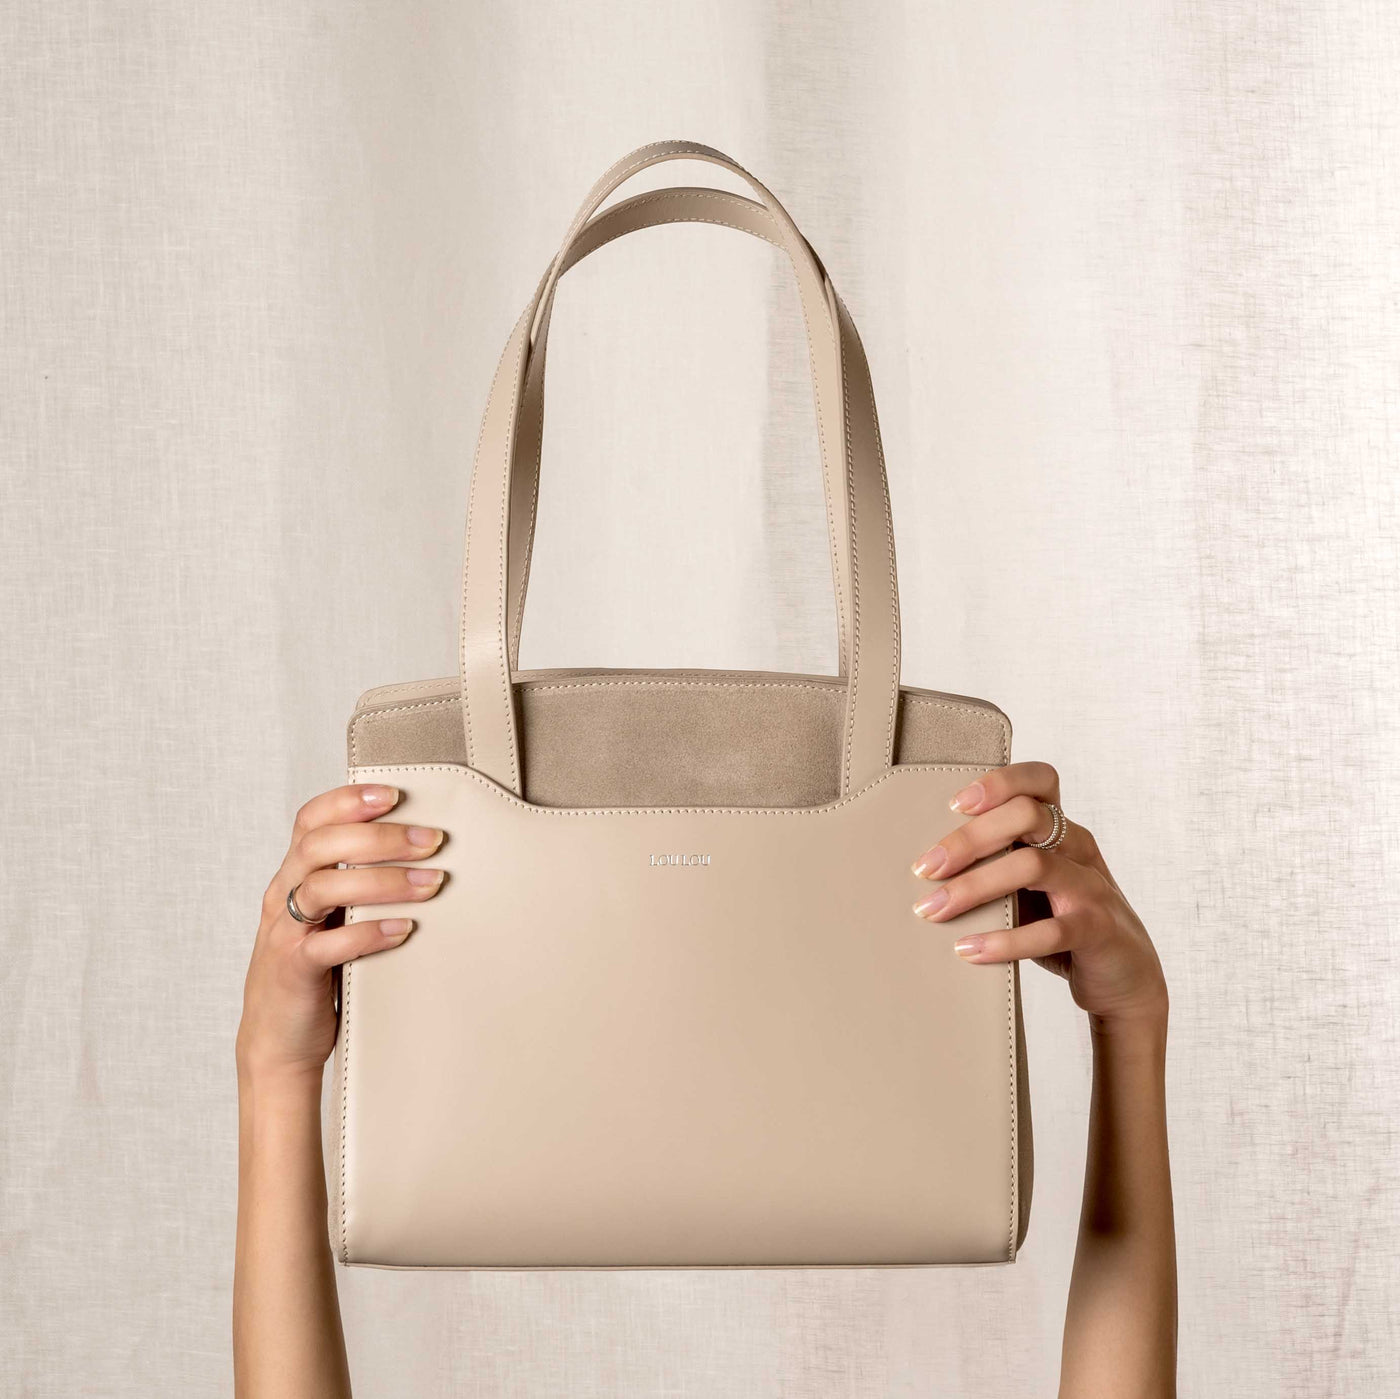 wol wit tas, creme tas, loulou tas, by loulou, loulou essentiels, wintercollectie, dutchdesign, fair fashion, leather bags, duurzaam, sustainable